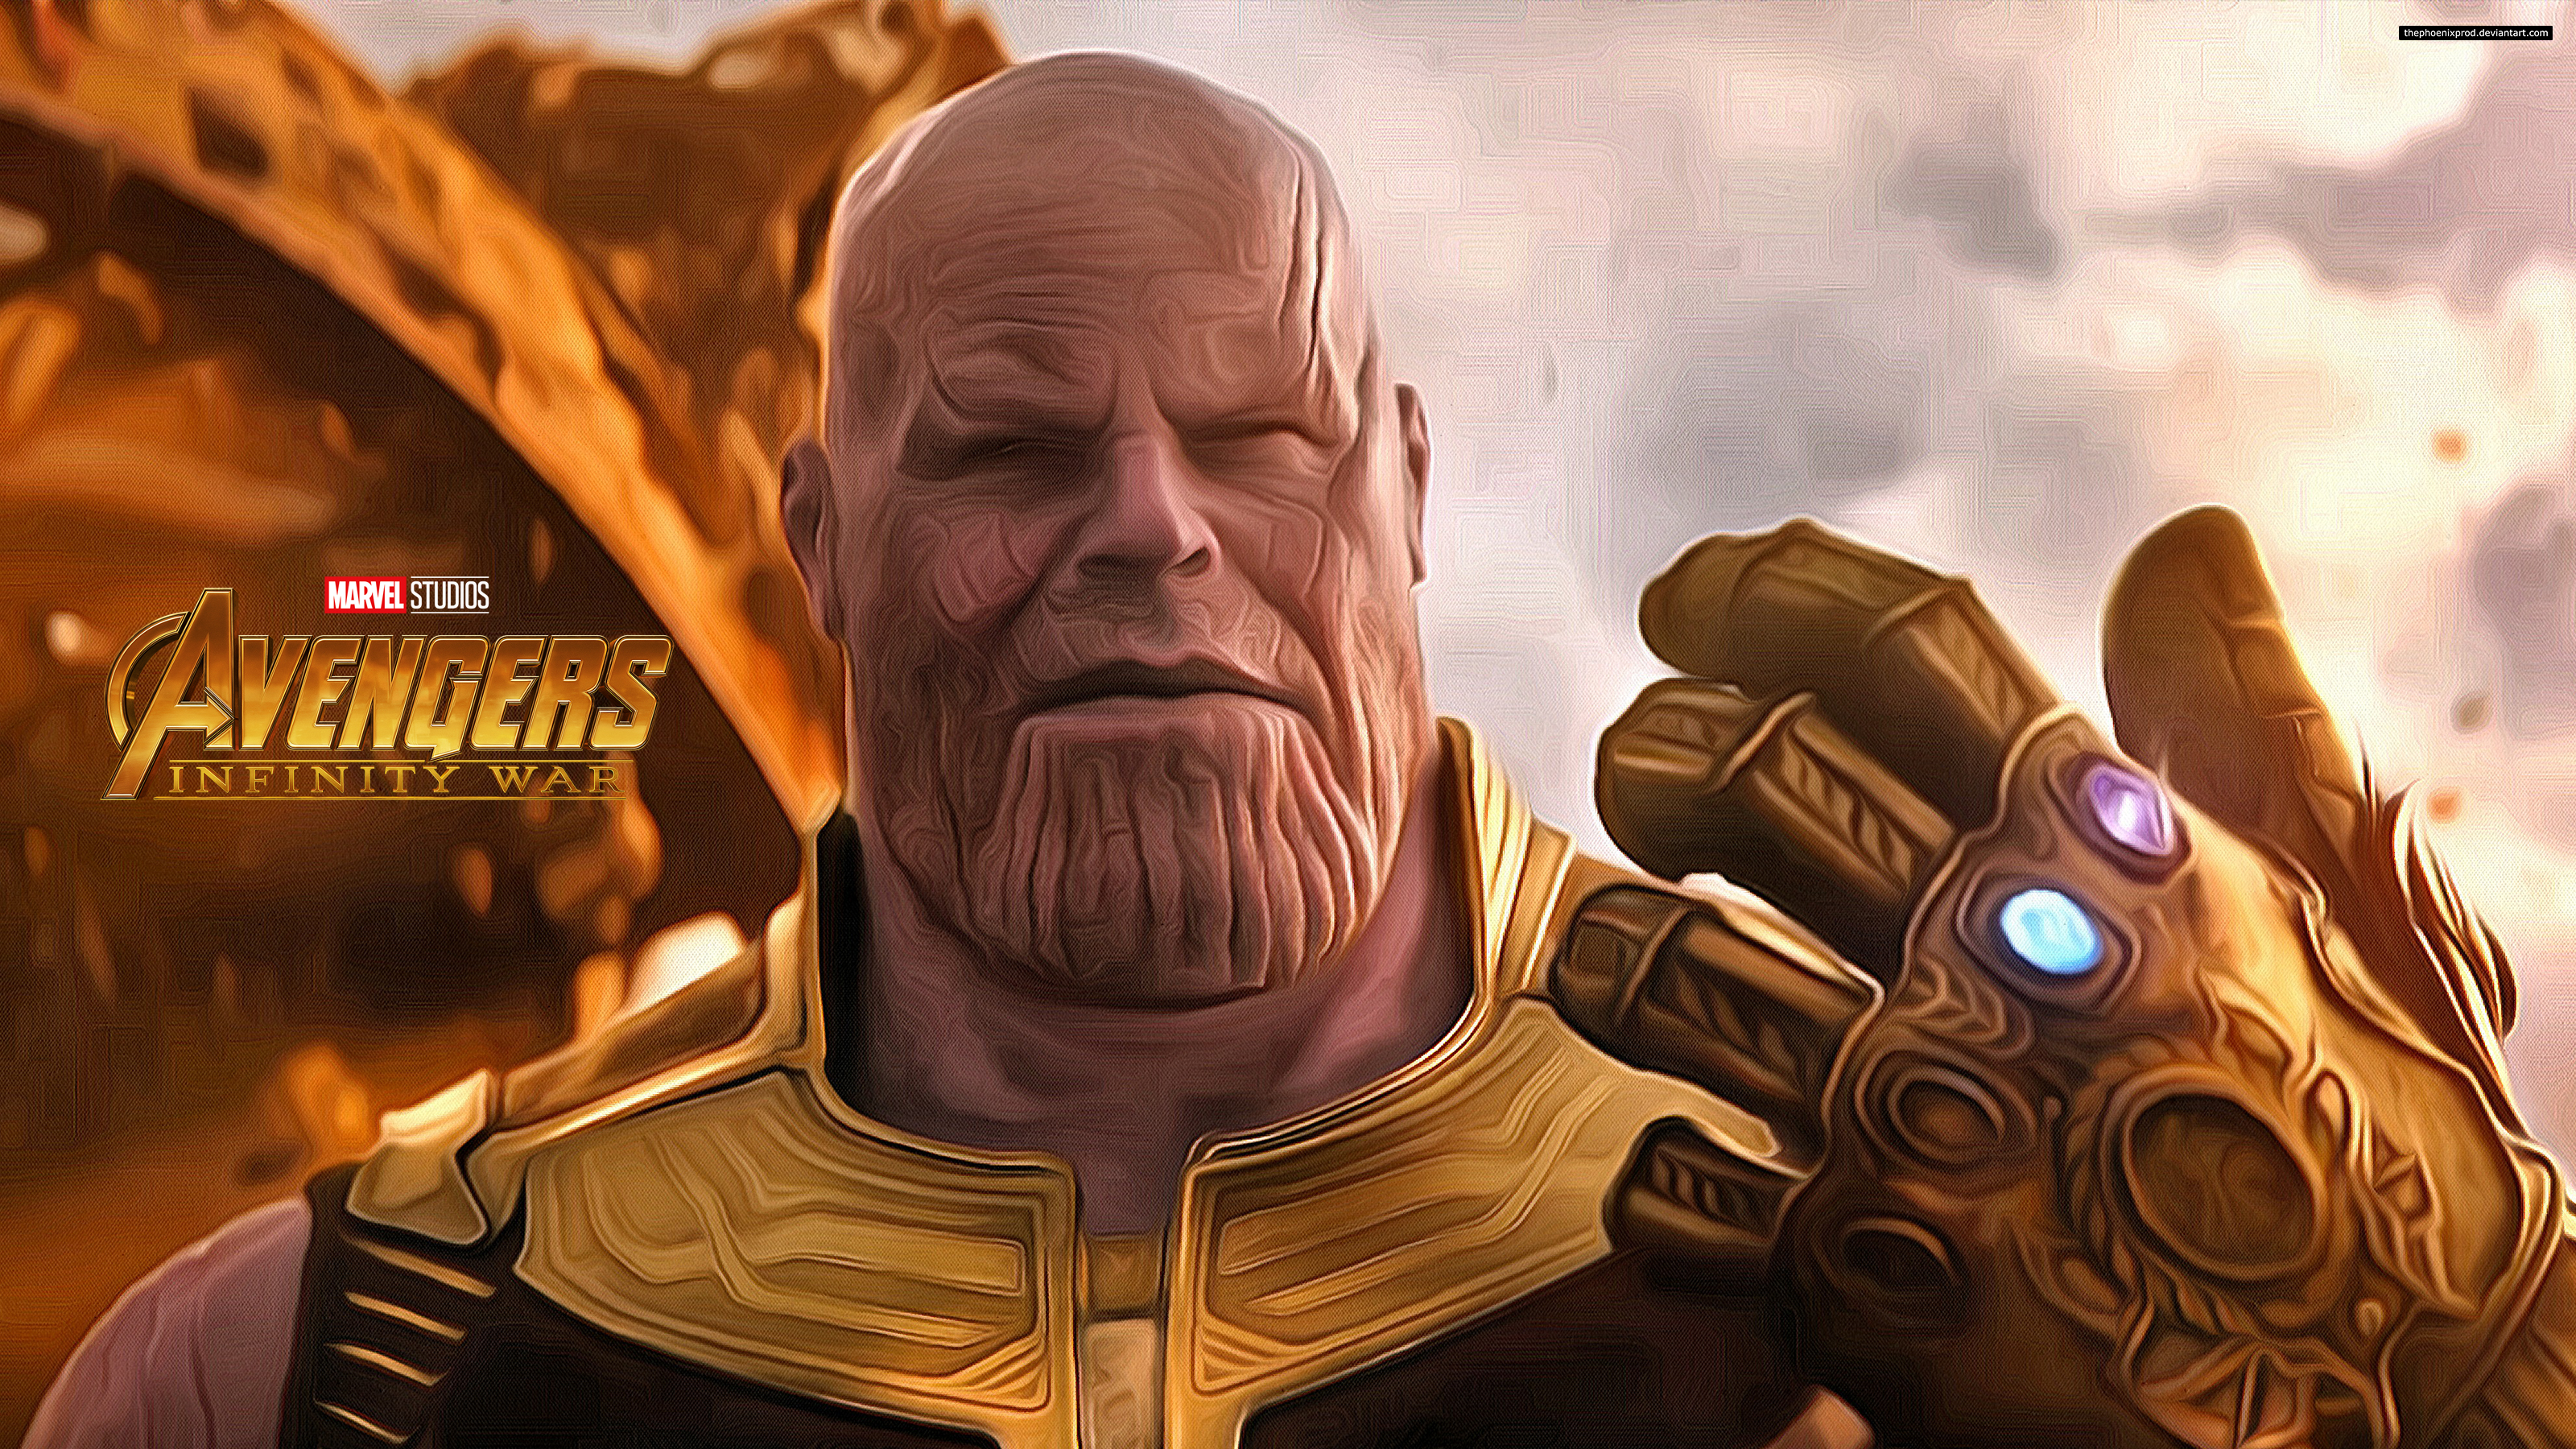 Thanos in Avengers Infinity War6712716553 - Thanos in Avengers Infinity War - War, Thriller, Thanos, Infinity, Avengers